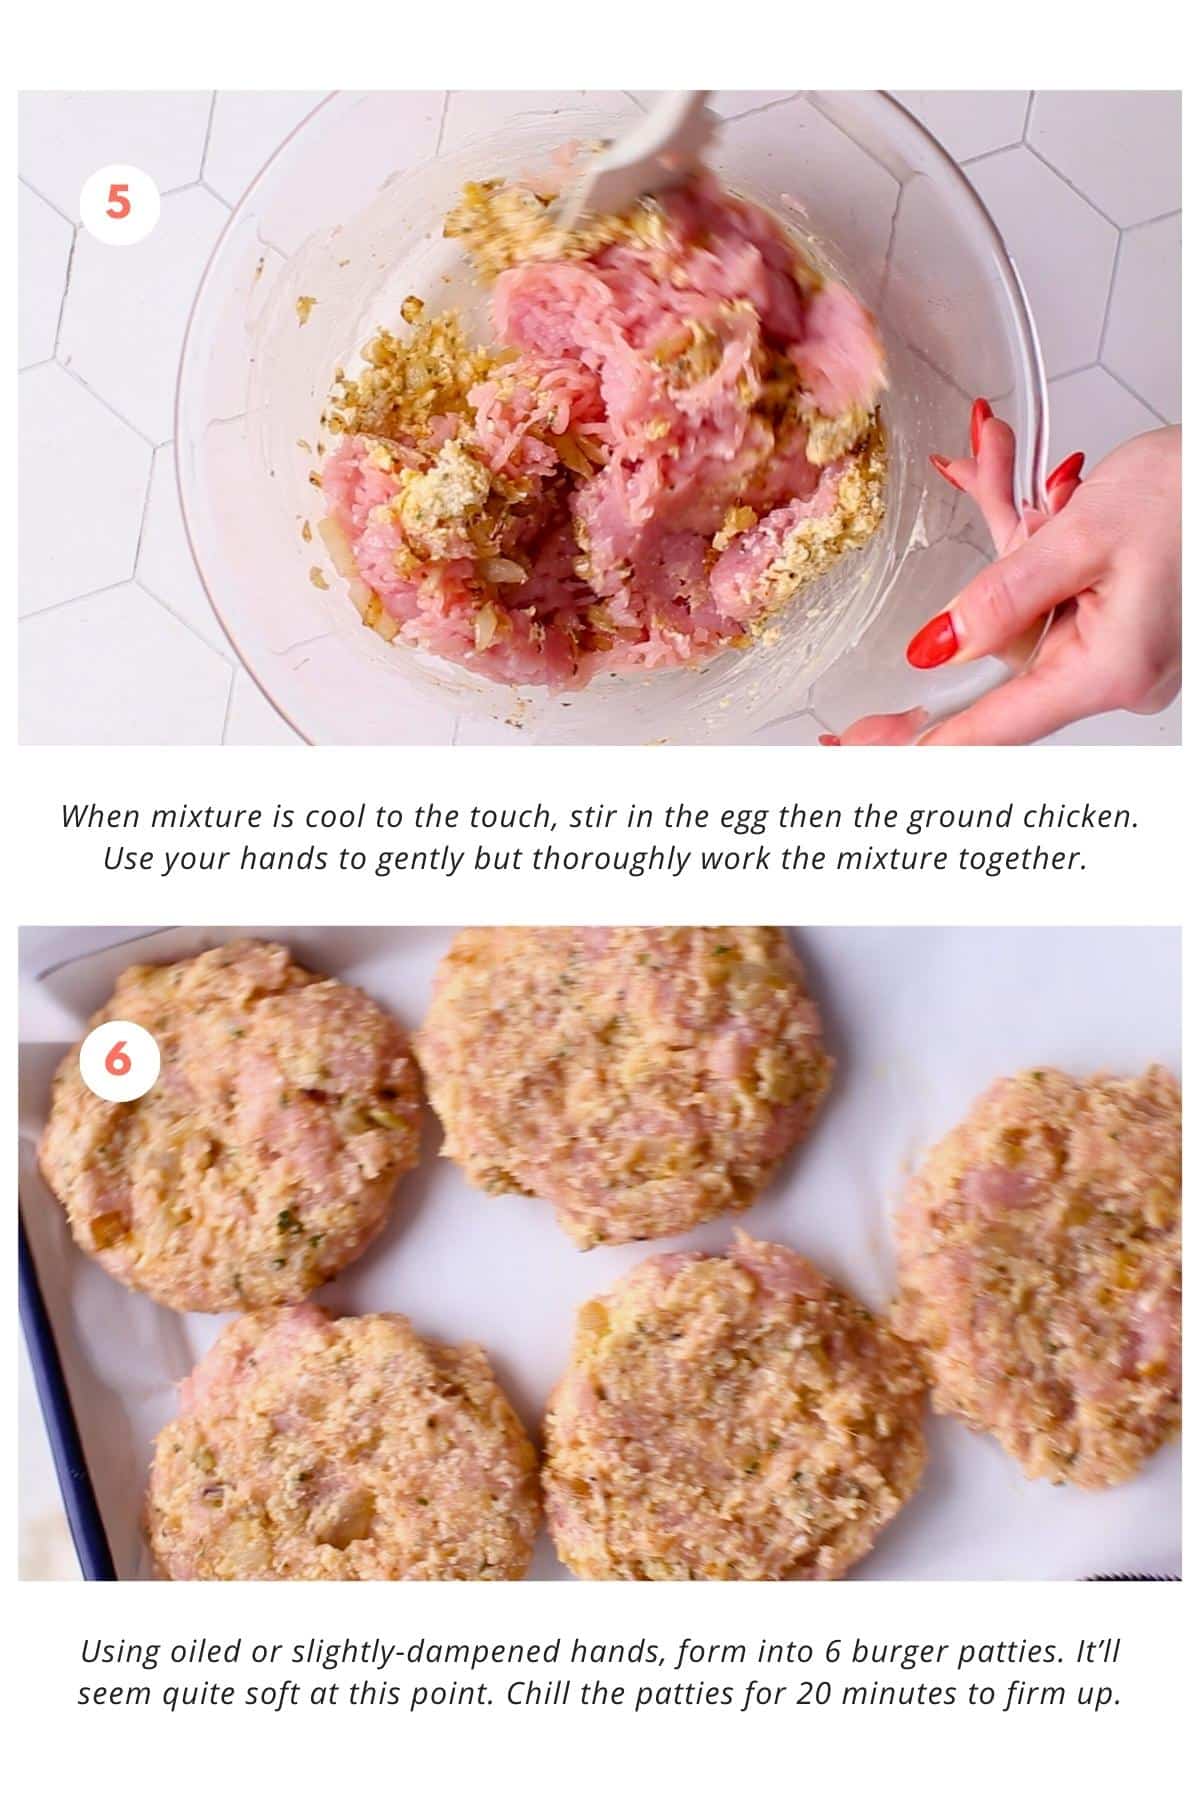 The mixture is stirred until the egg and ground chicken are well combined. The mixture is then gently but thoroughly worked together with the hands. The mixture is formed into 6 burger patties with oiled or slightly-dampened hands. The patties are chilled for 20 minutes to firm up.